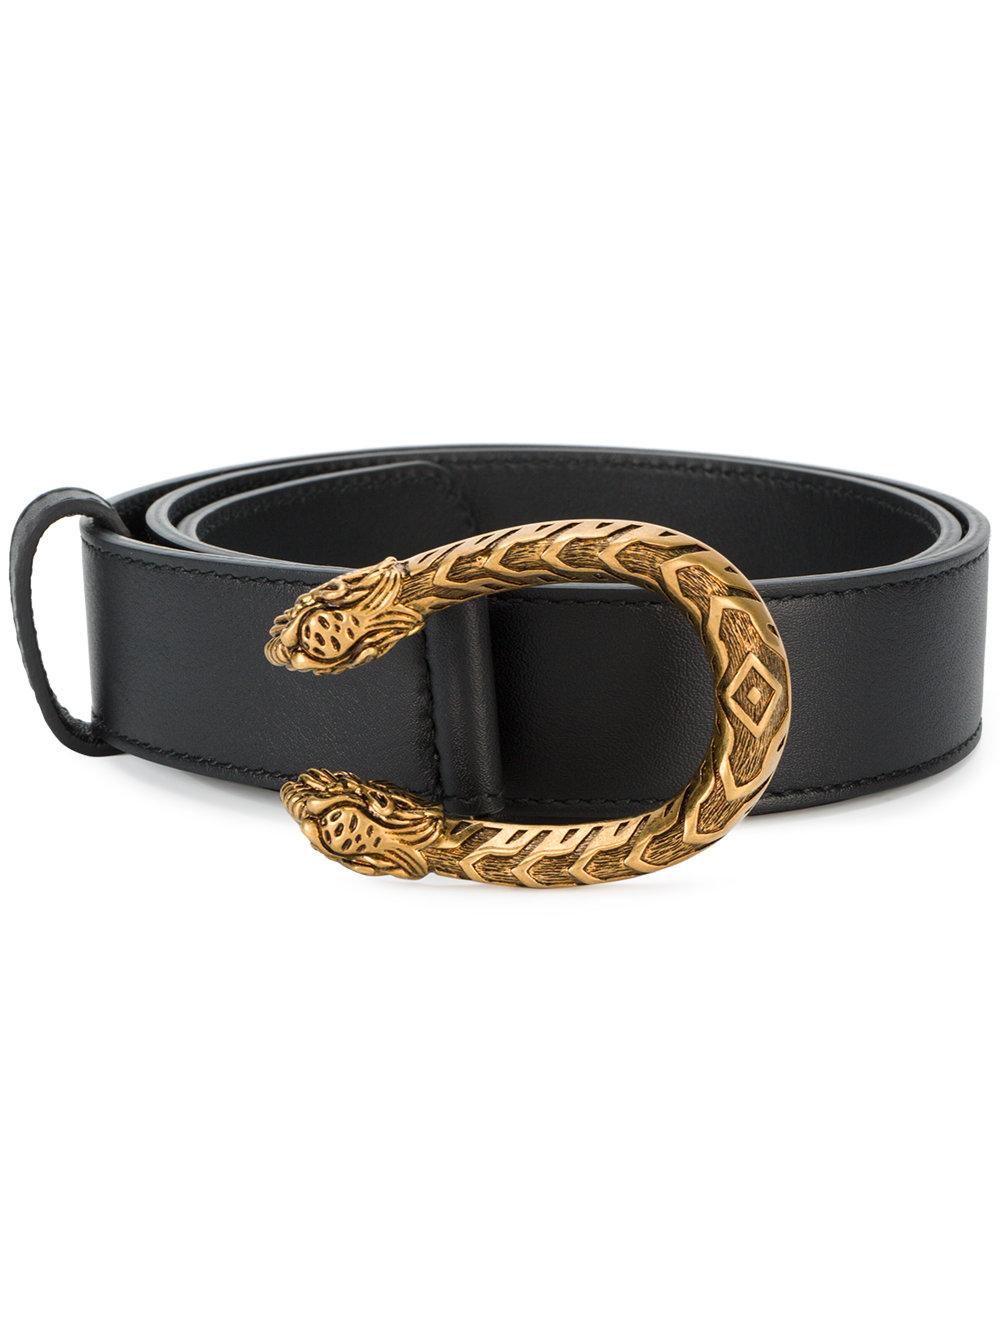 Gucci Dionysus Belt Outfit | Paul Smith